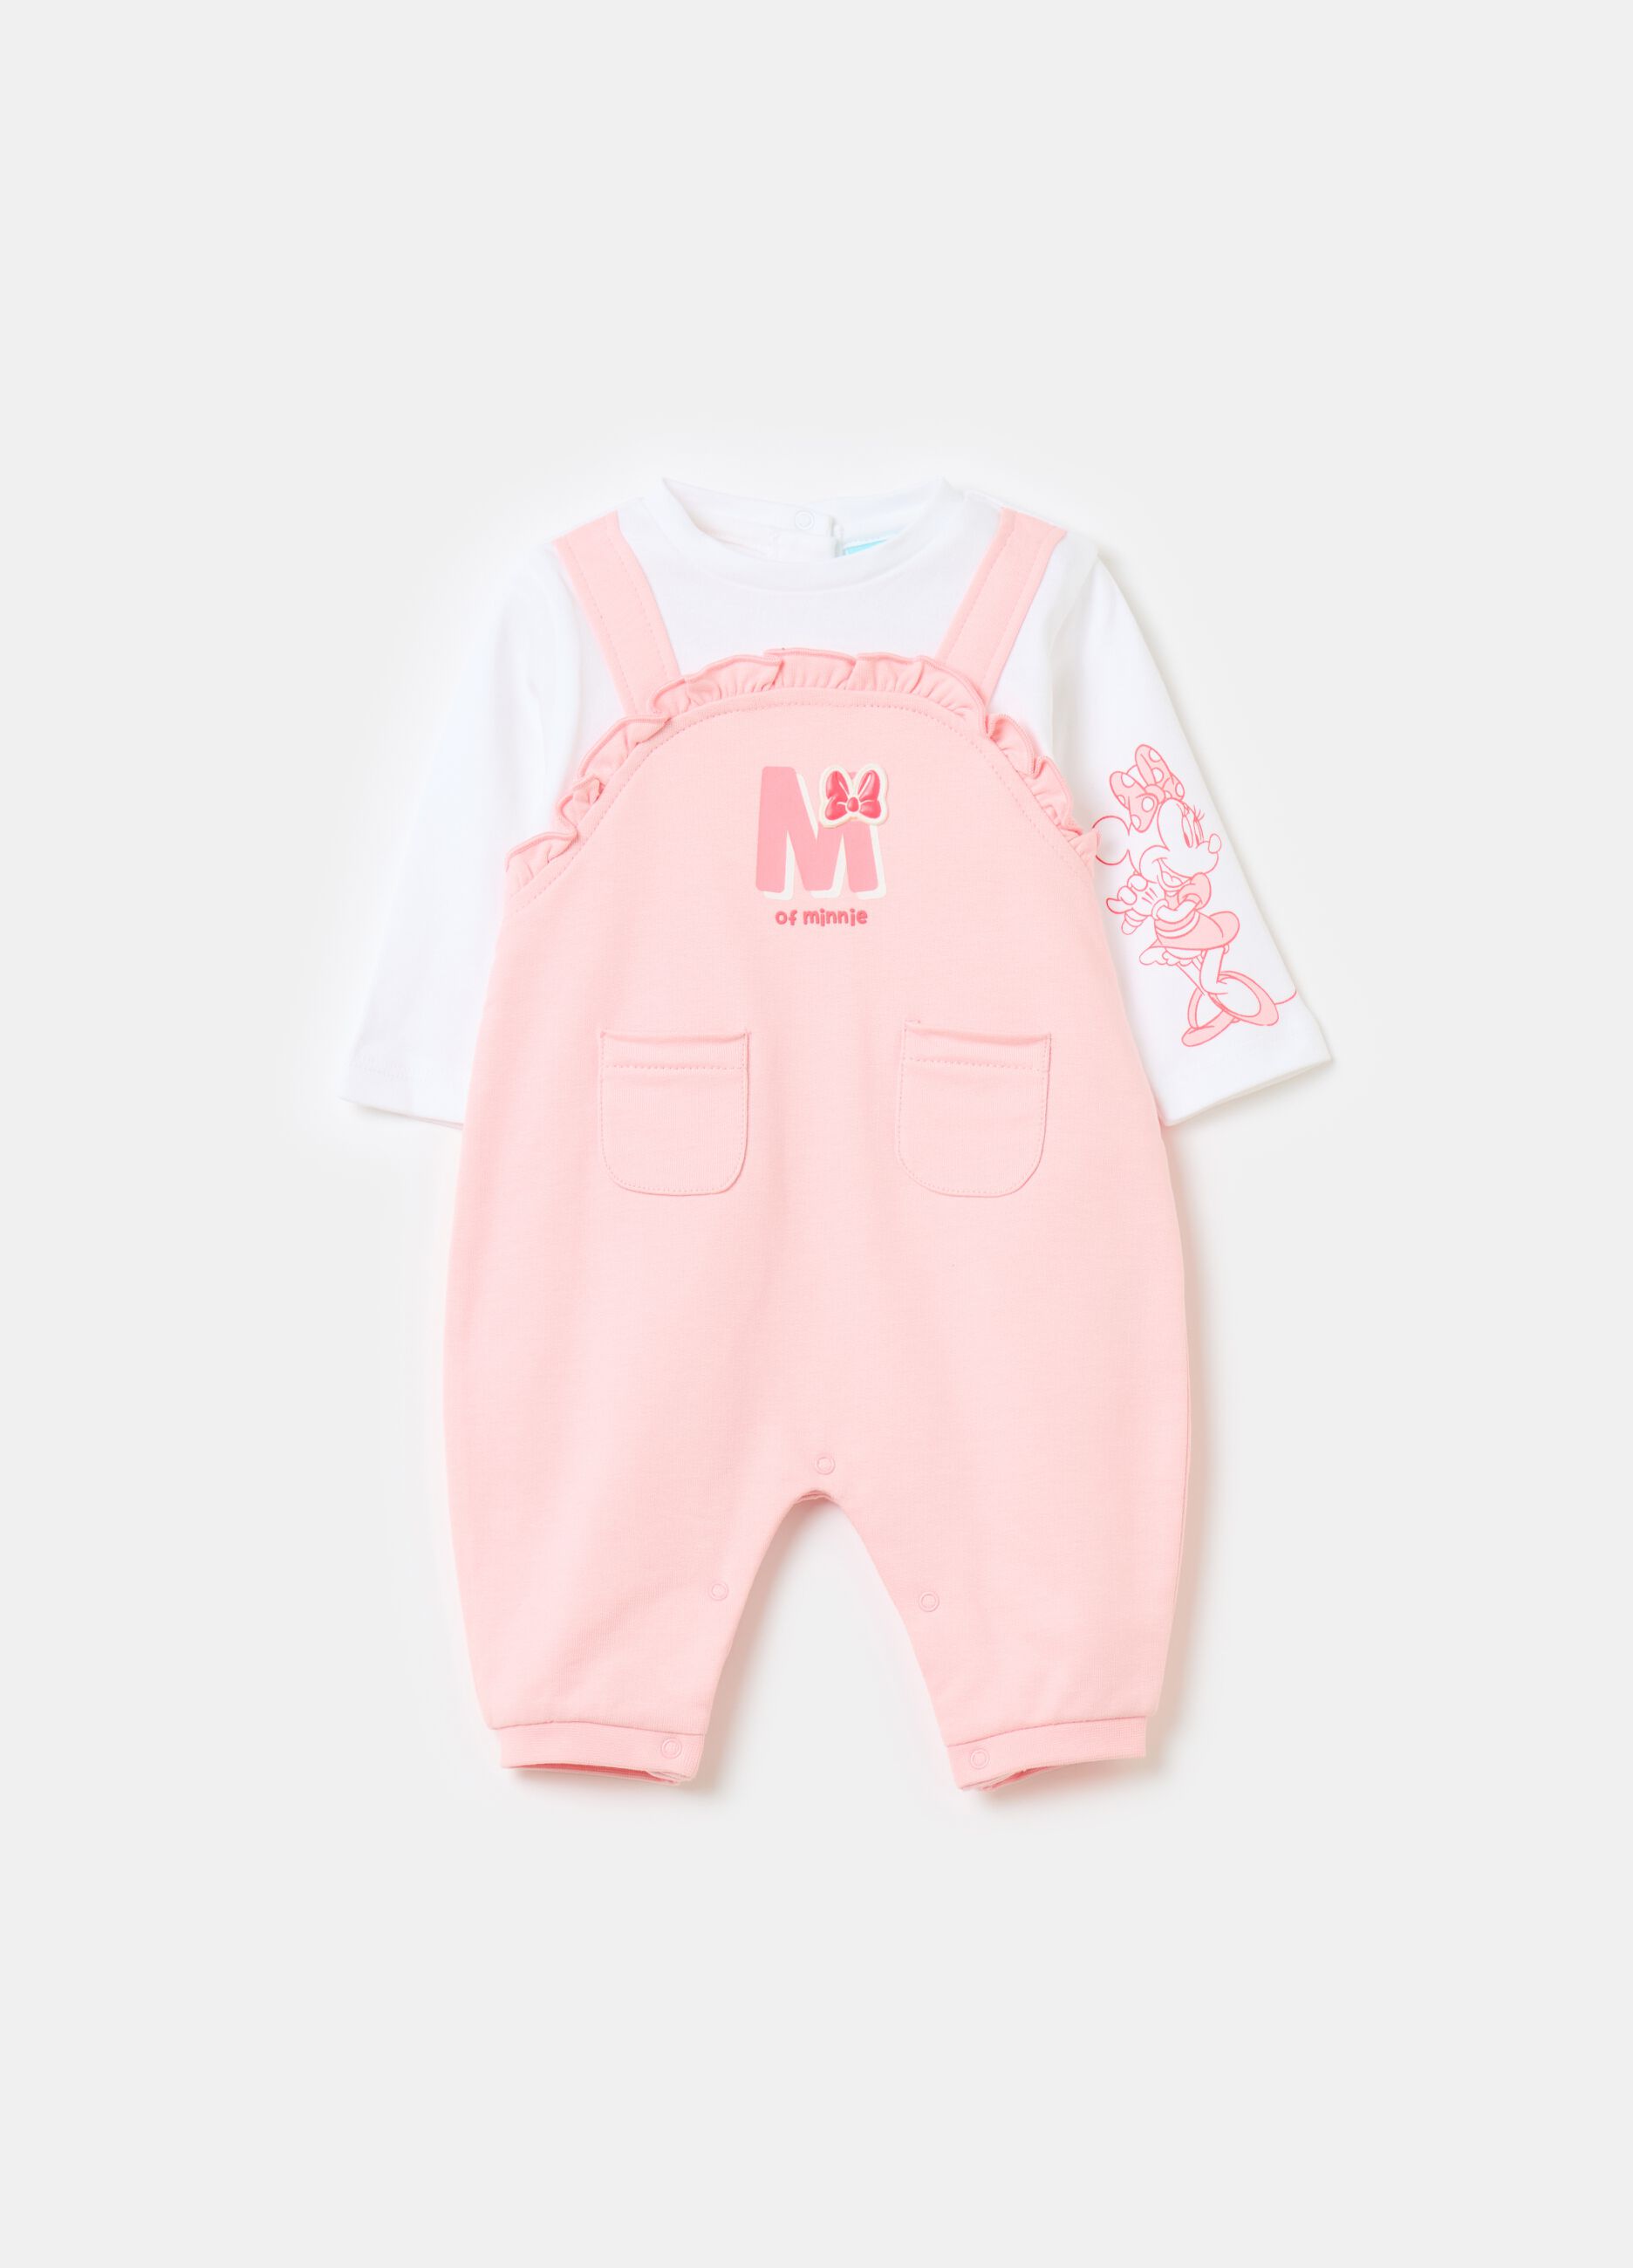 Organic cotton onesie with Minnie Mouse print